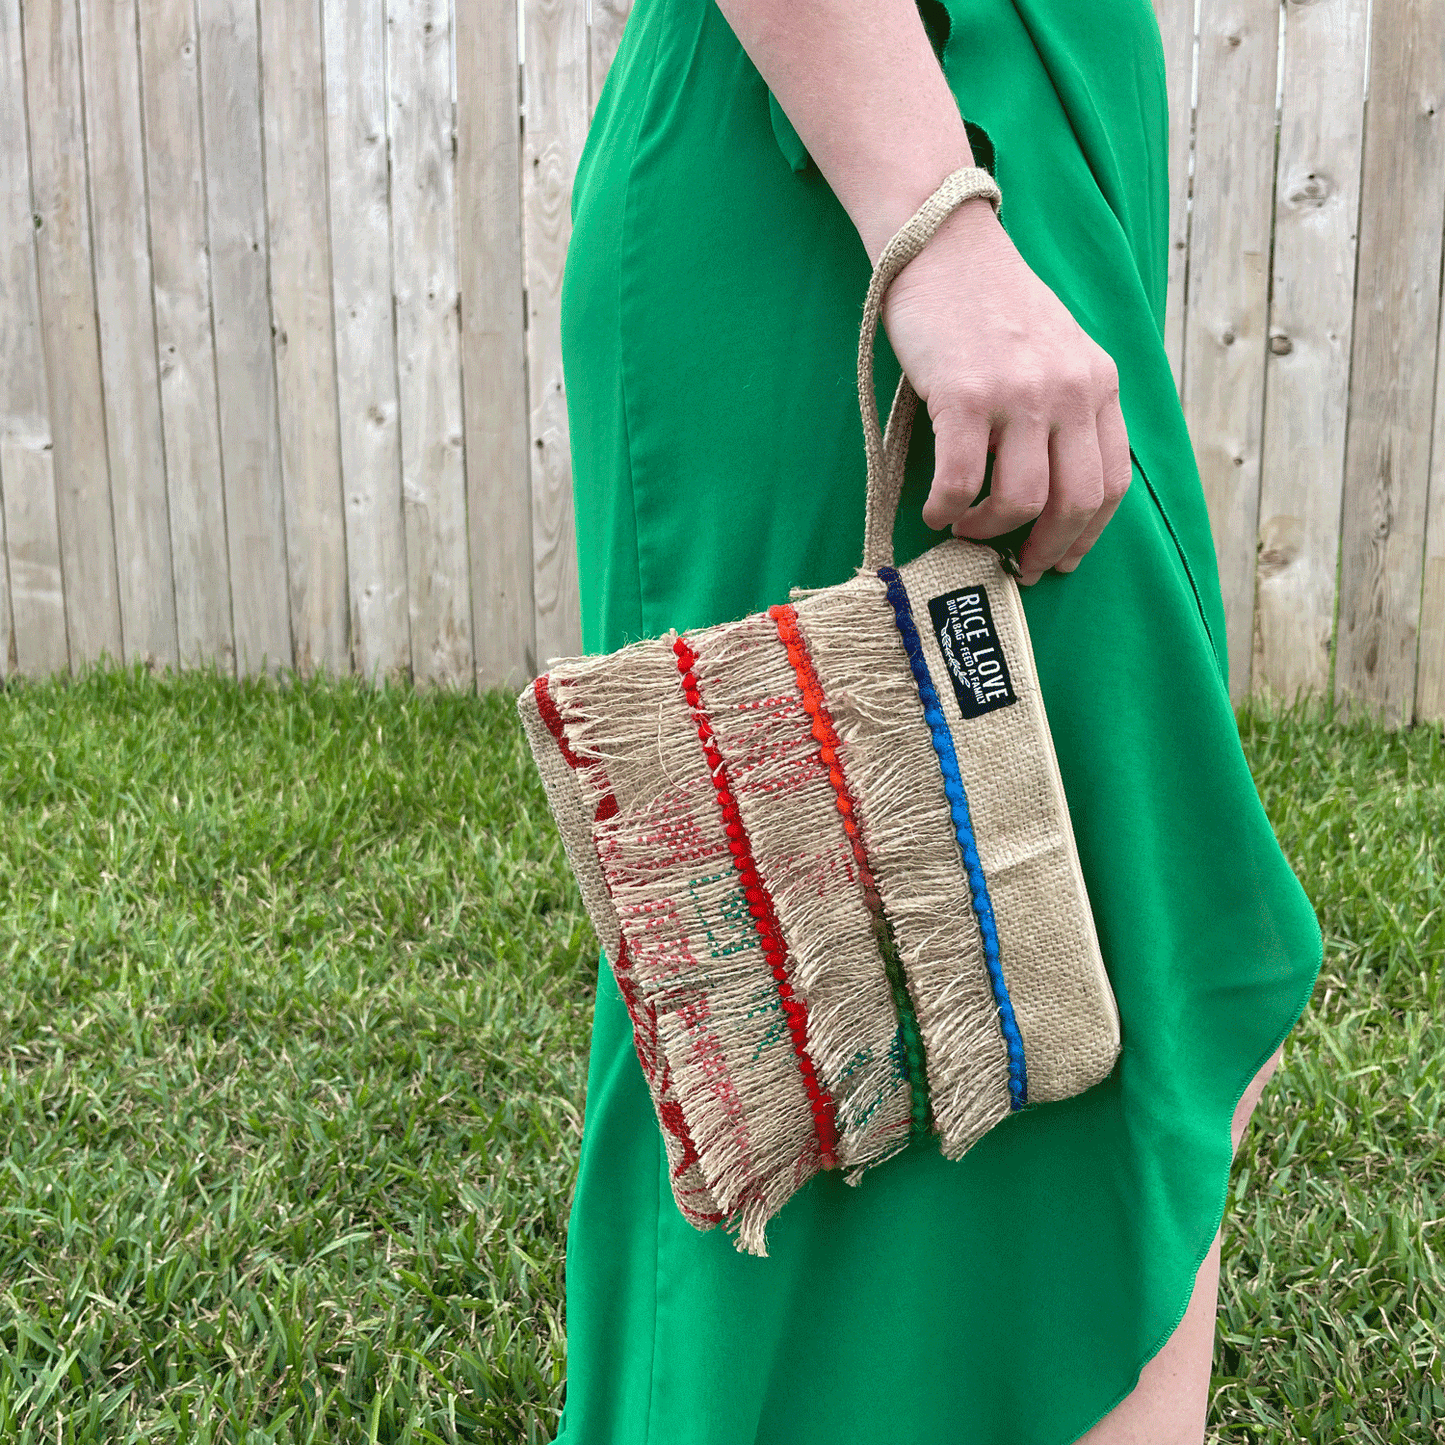 Recycled Fringe Clutch by Rice Love